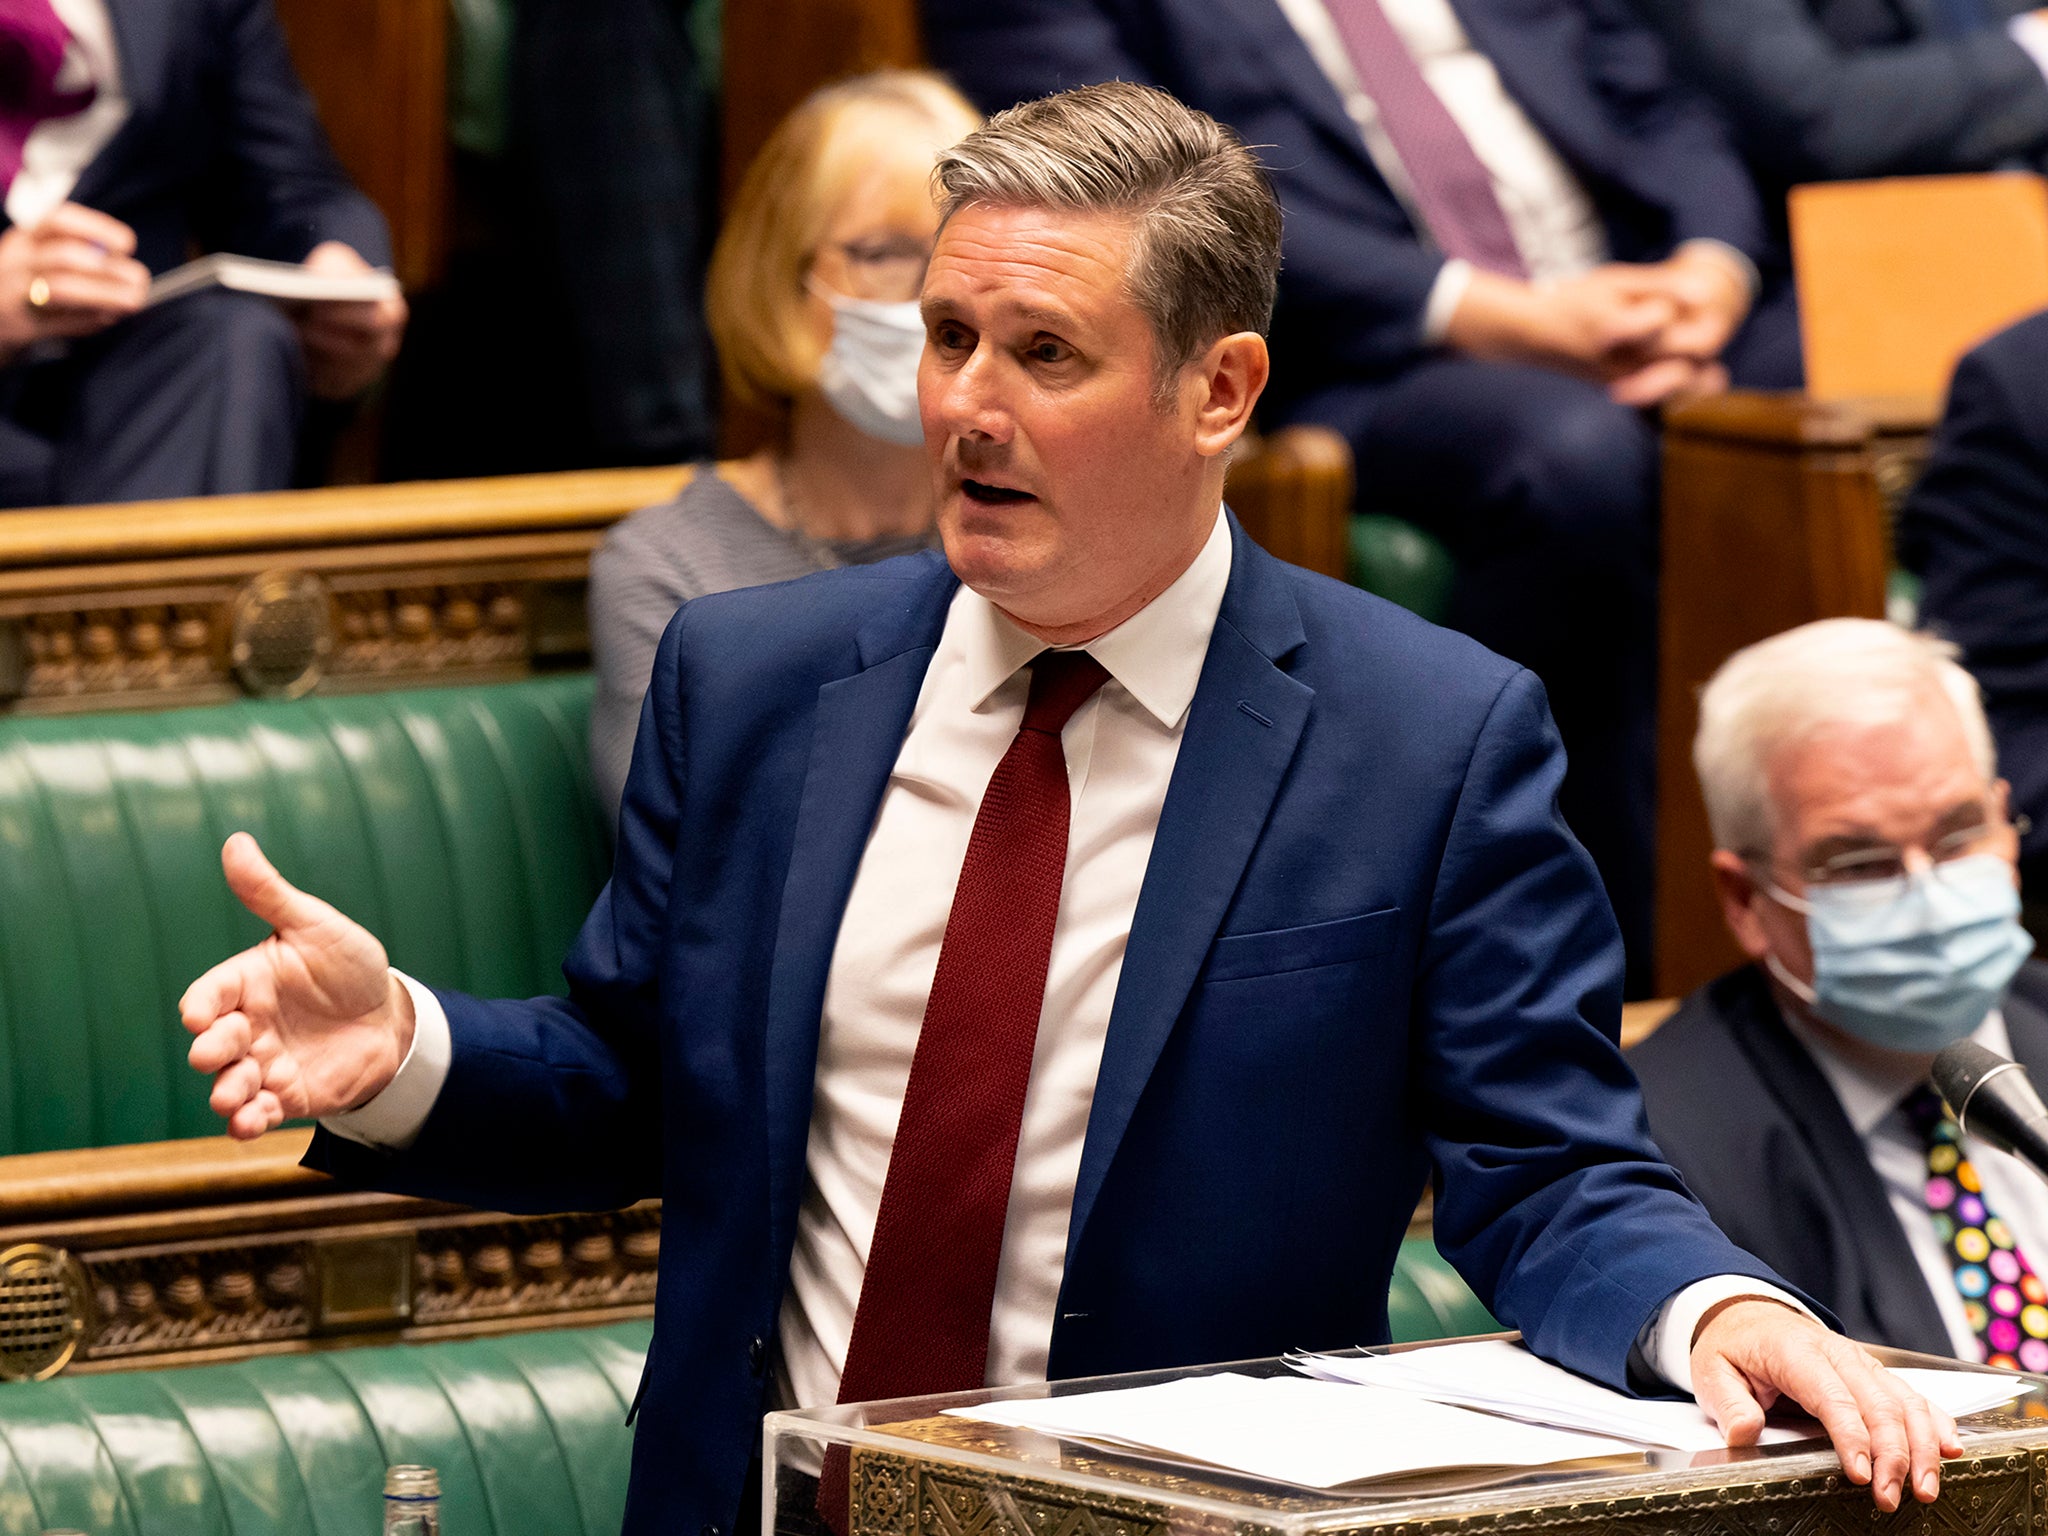 ‘We are betraying the Afghan people, who cannot be left to the cruelty of the Taliban,’ Starmer said in the Commons